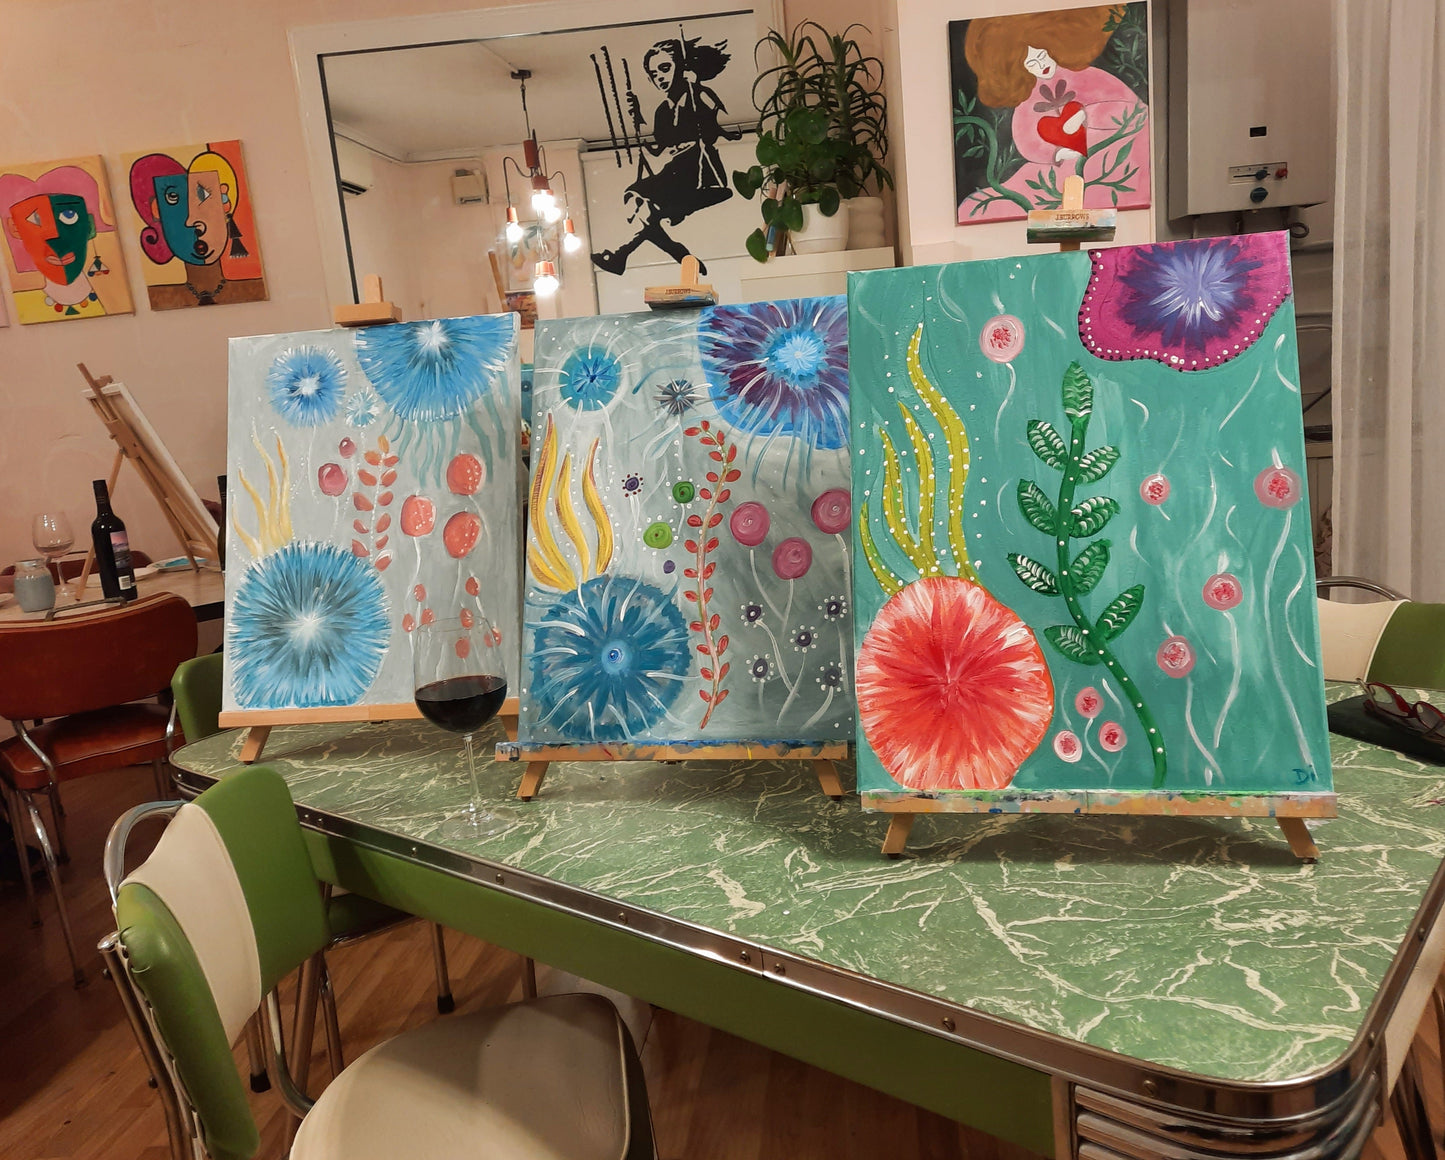 PRIVATE BOOKING - Karen's Group Sunday 16th JUNE. 1pm - 3pm art TBA